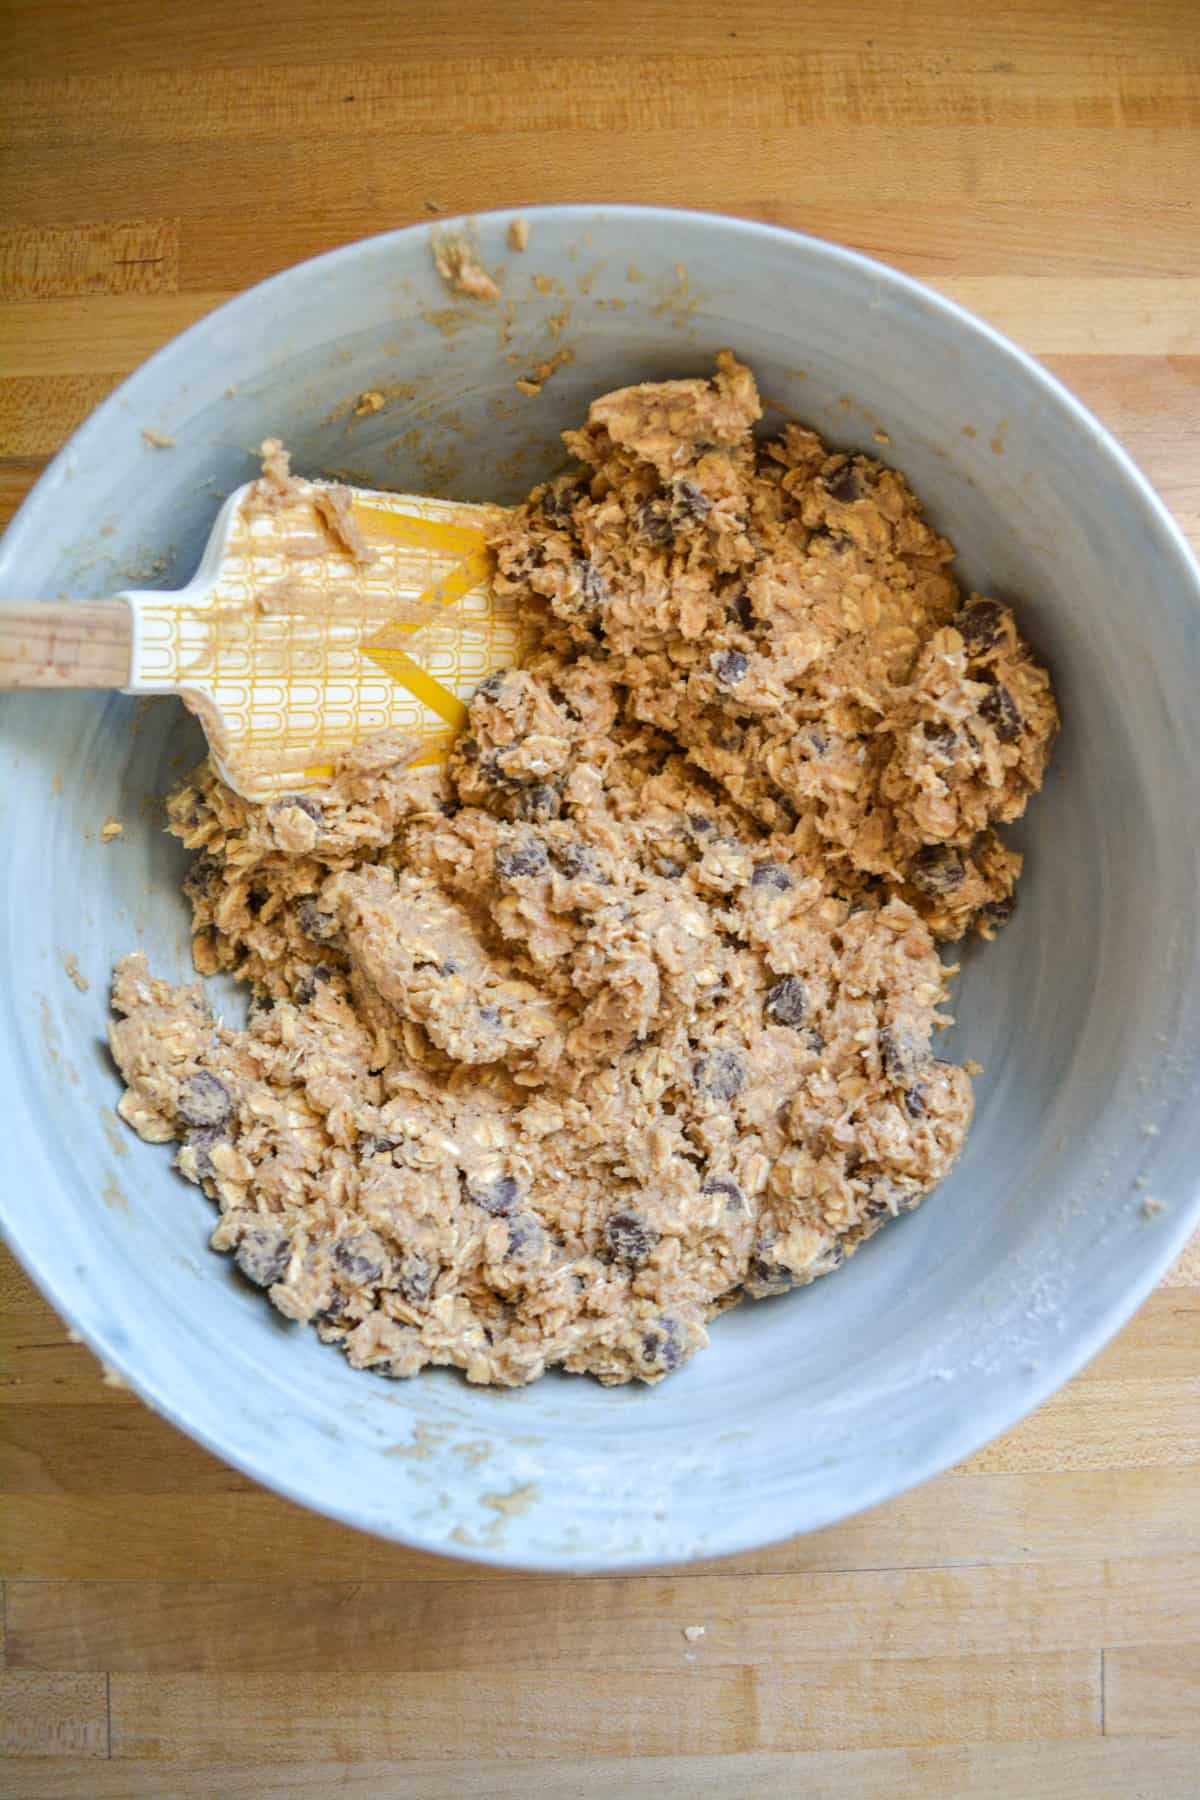 Chocolate chips folded into the oatmeal cookie dough.